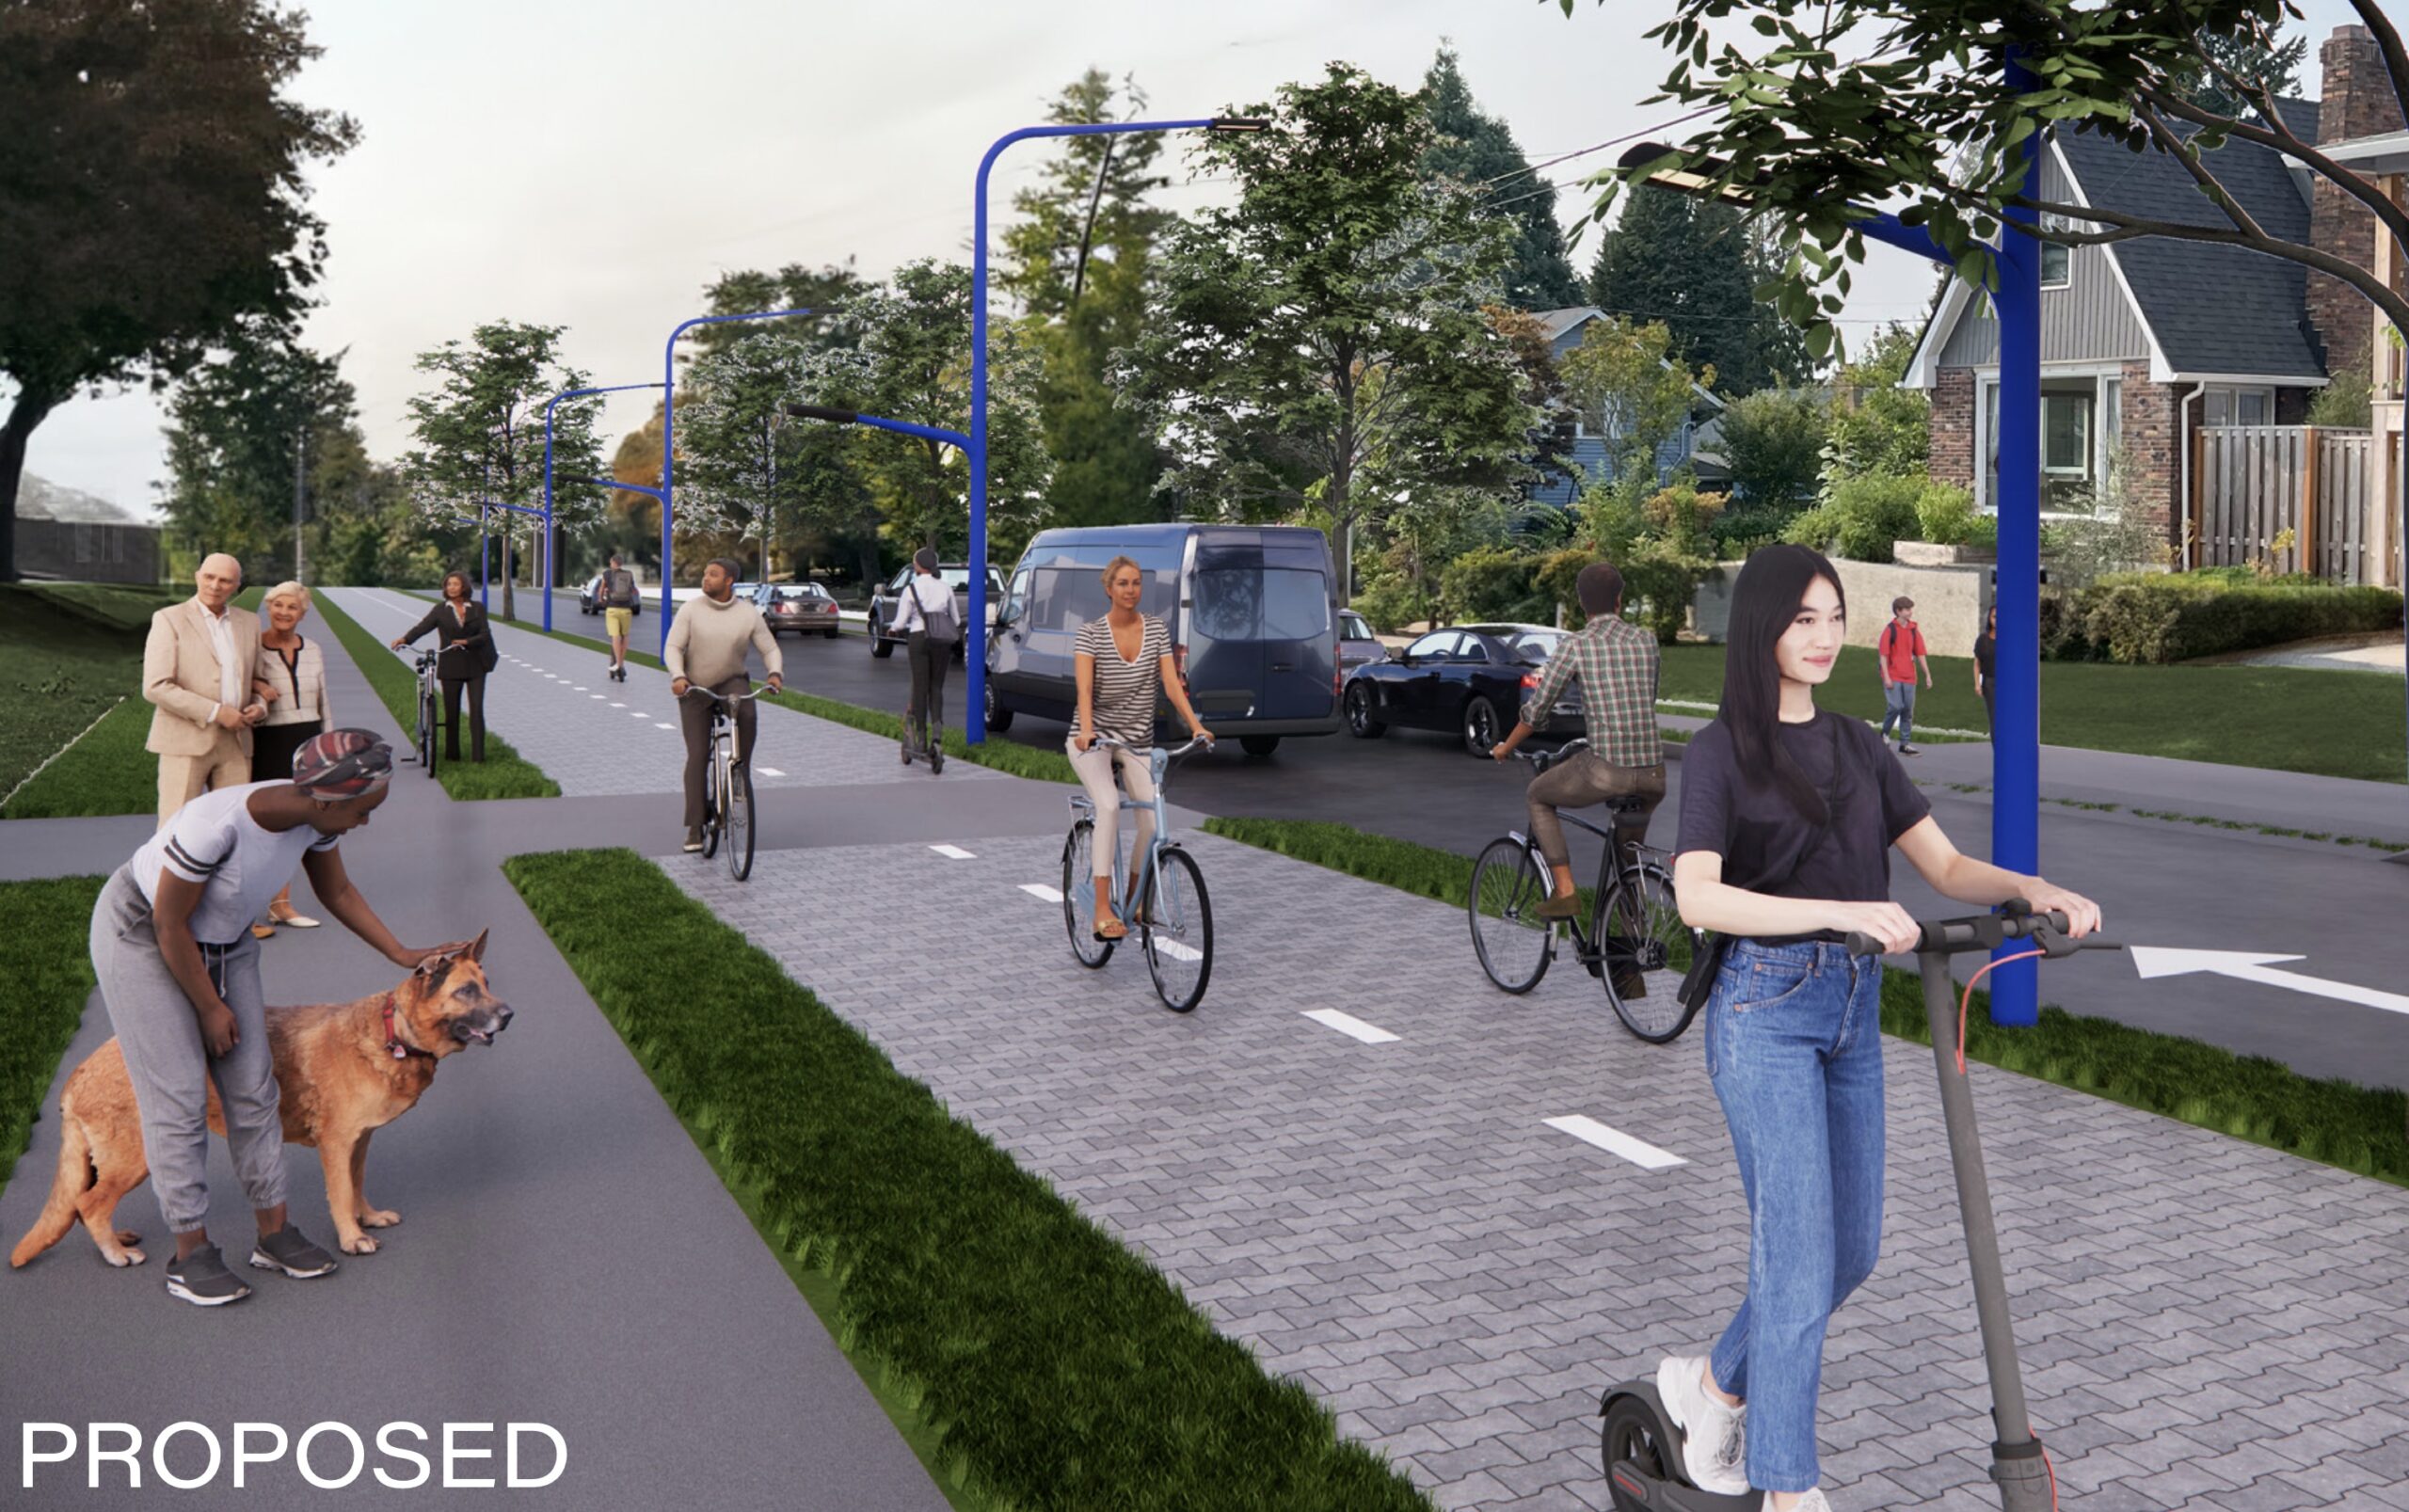 UNDER FURTHER REVIEW: DOT To Study Canal Street For Bike and